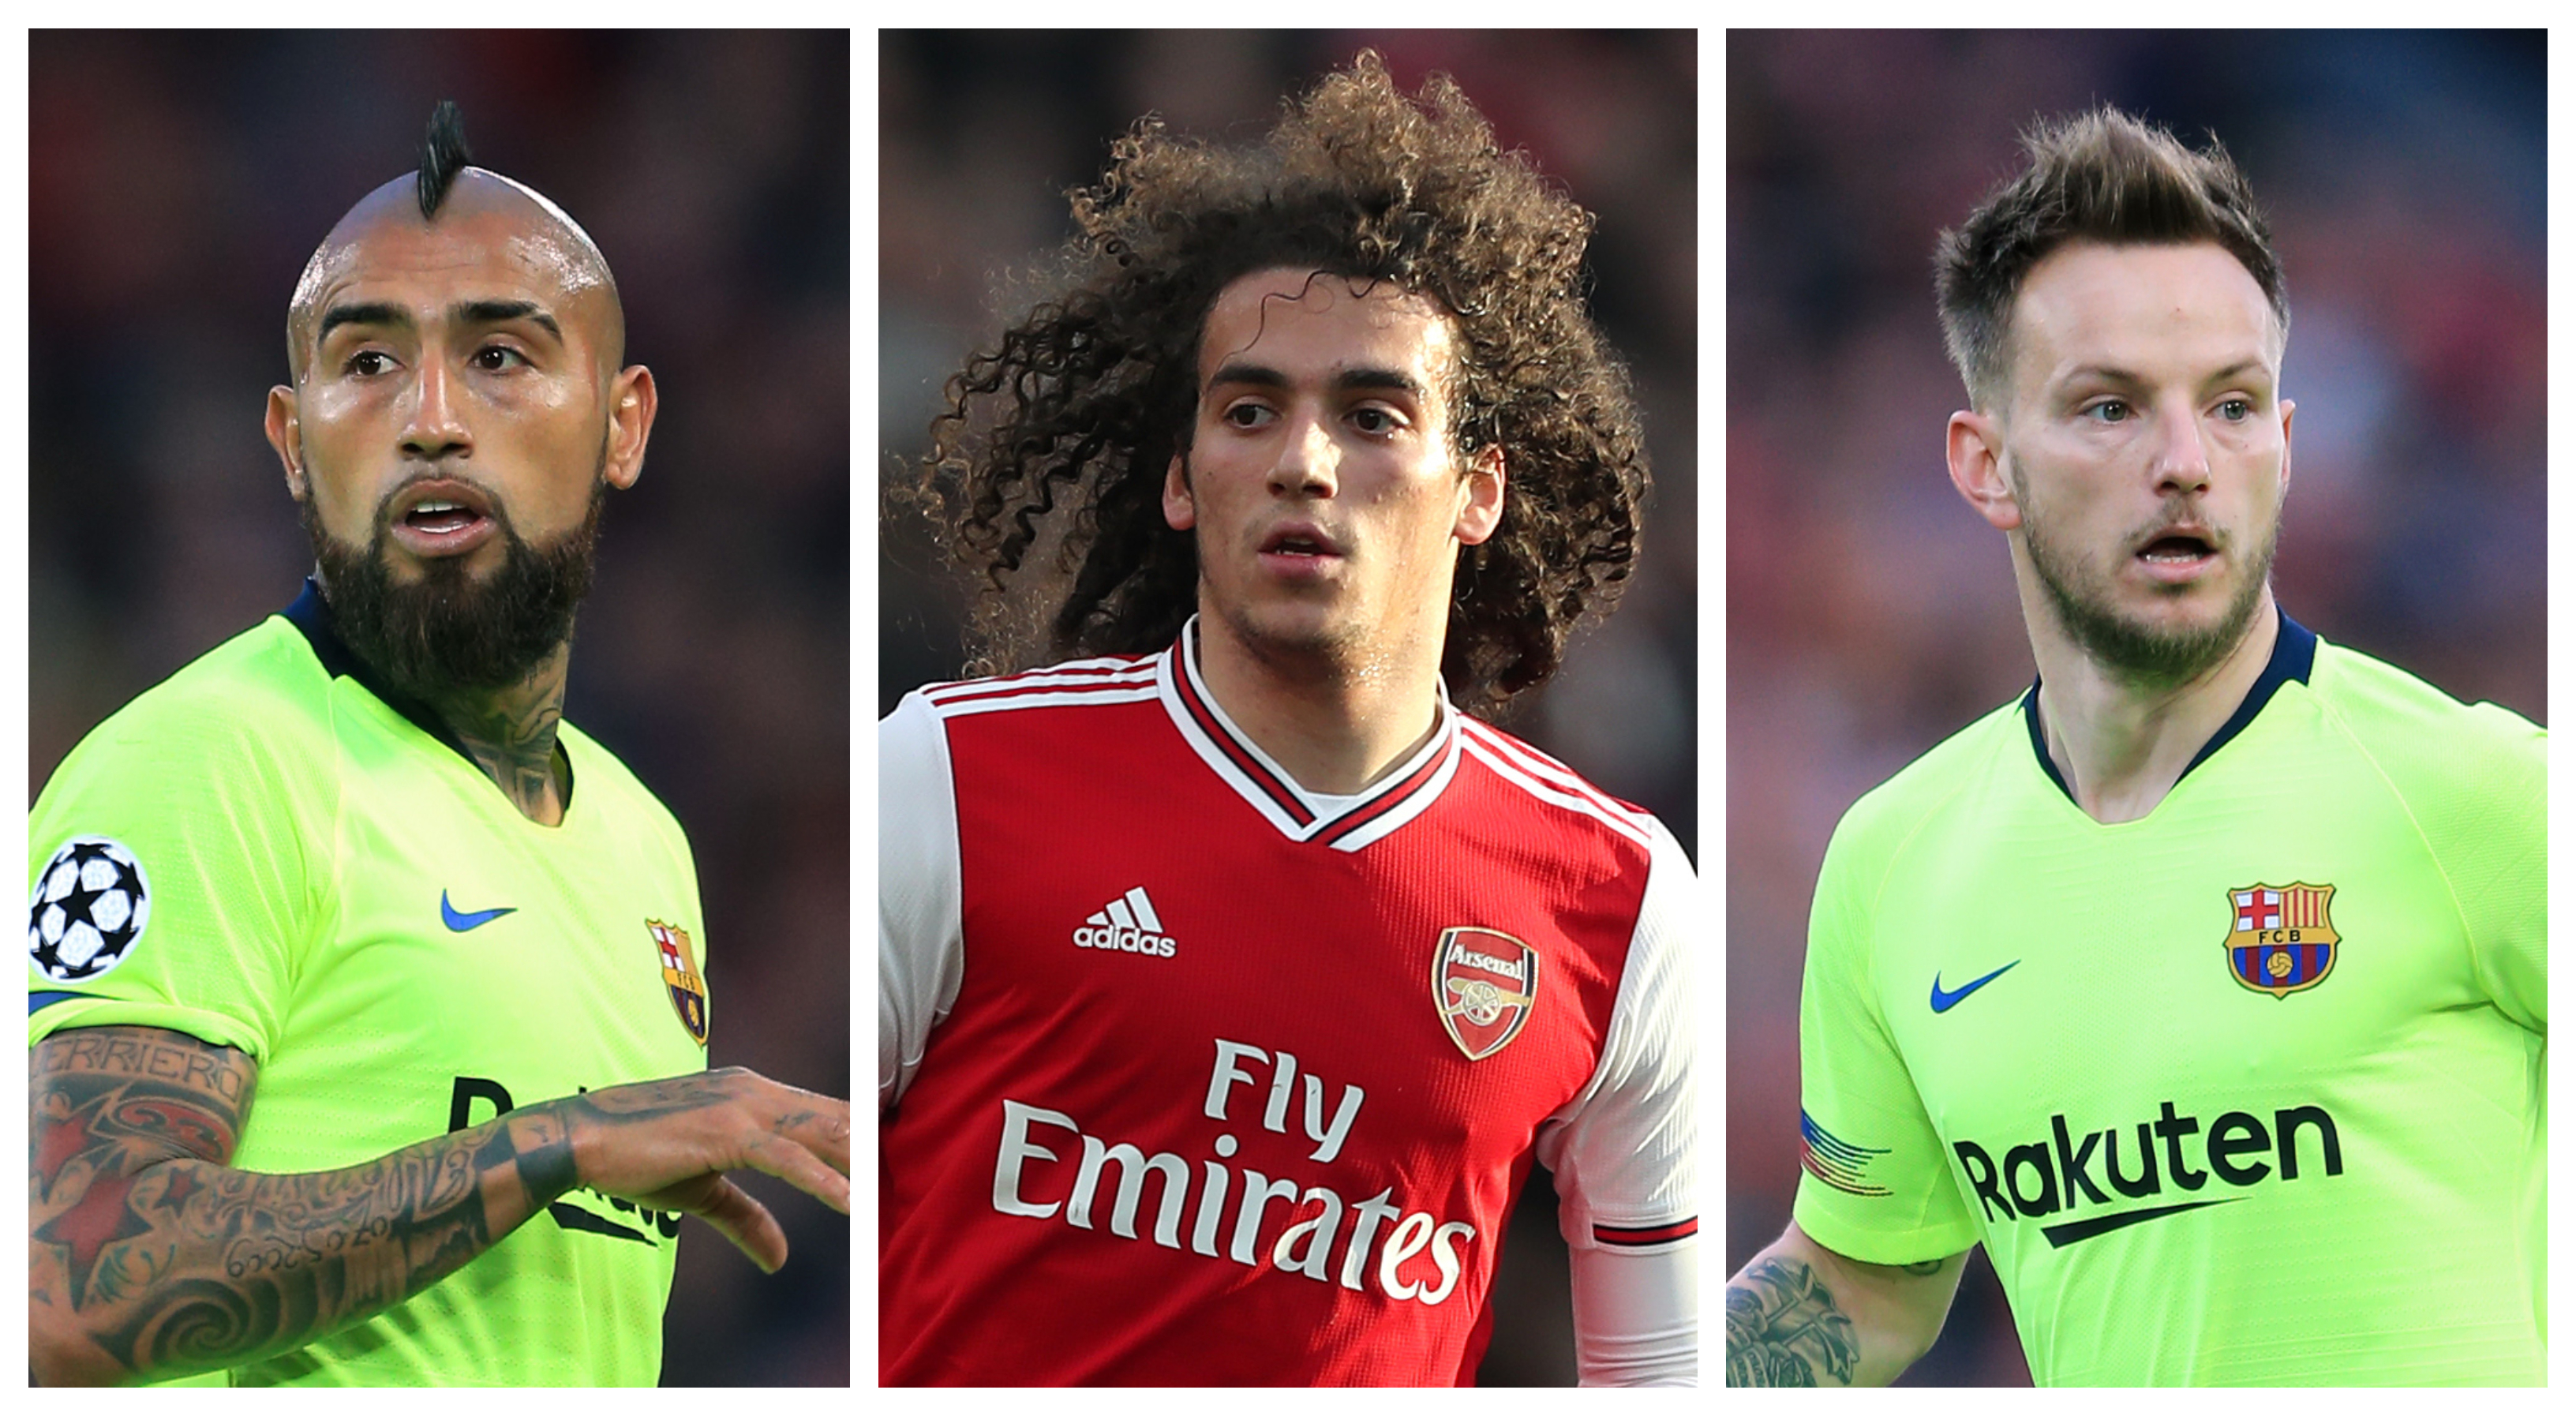 Arsenal transfer rumour round-up: Barca plan Guendouzi swap as Gunners given Partey ultimatum